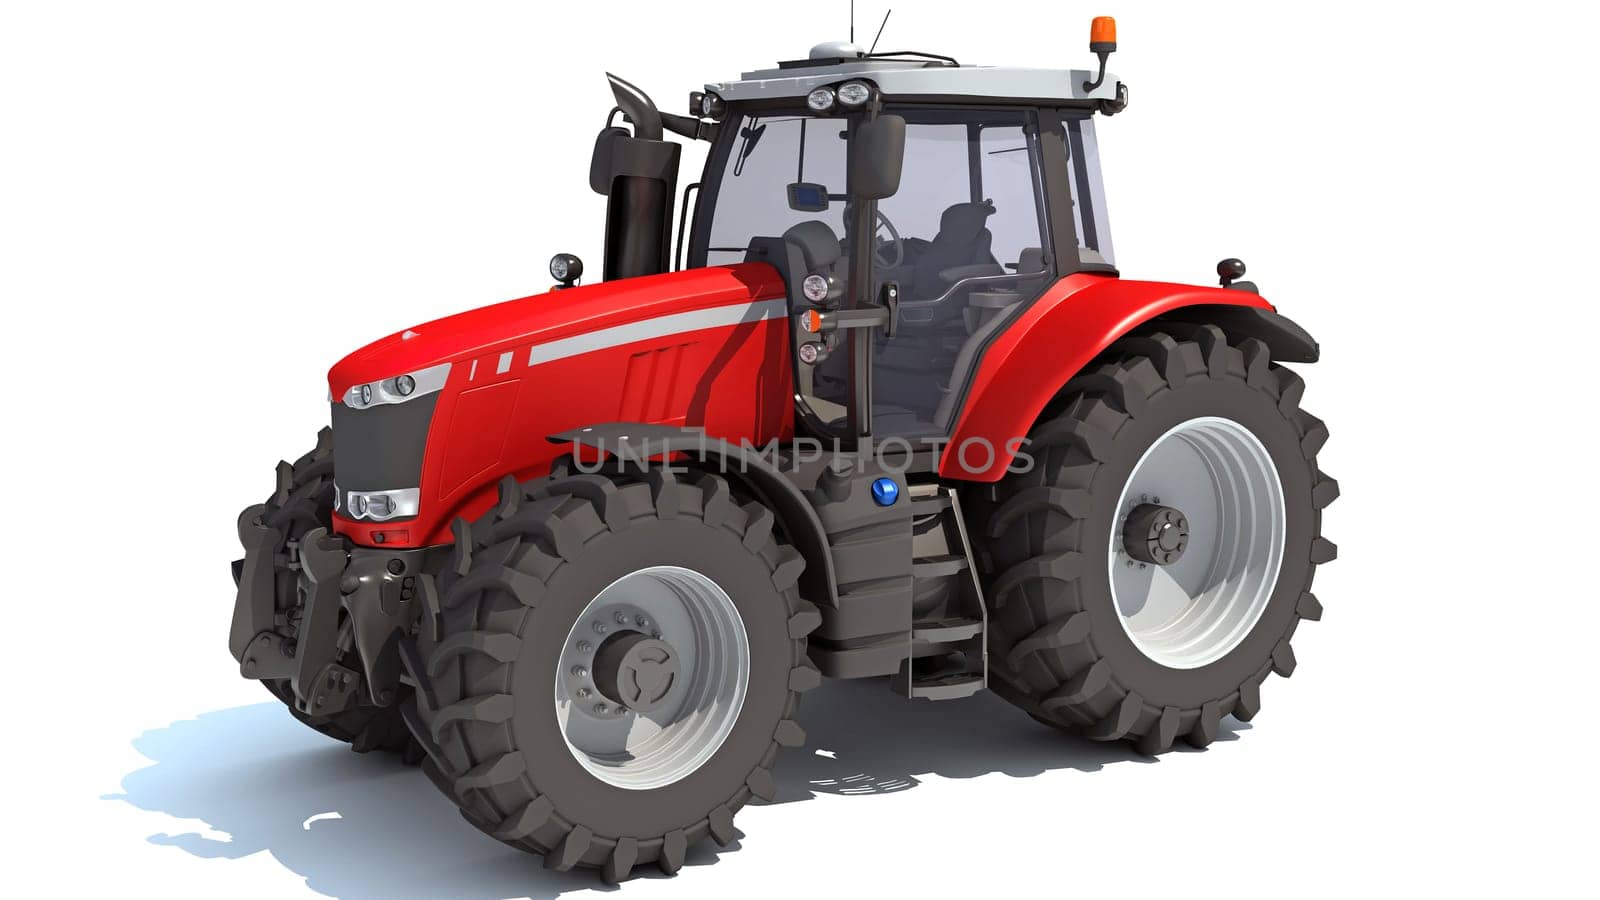 3D rendering of Farm Tractor model on white background by 3DHorse